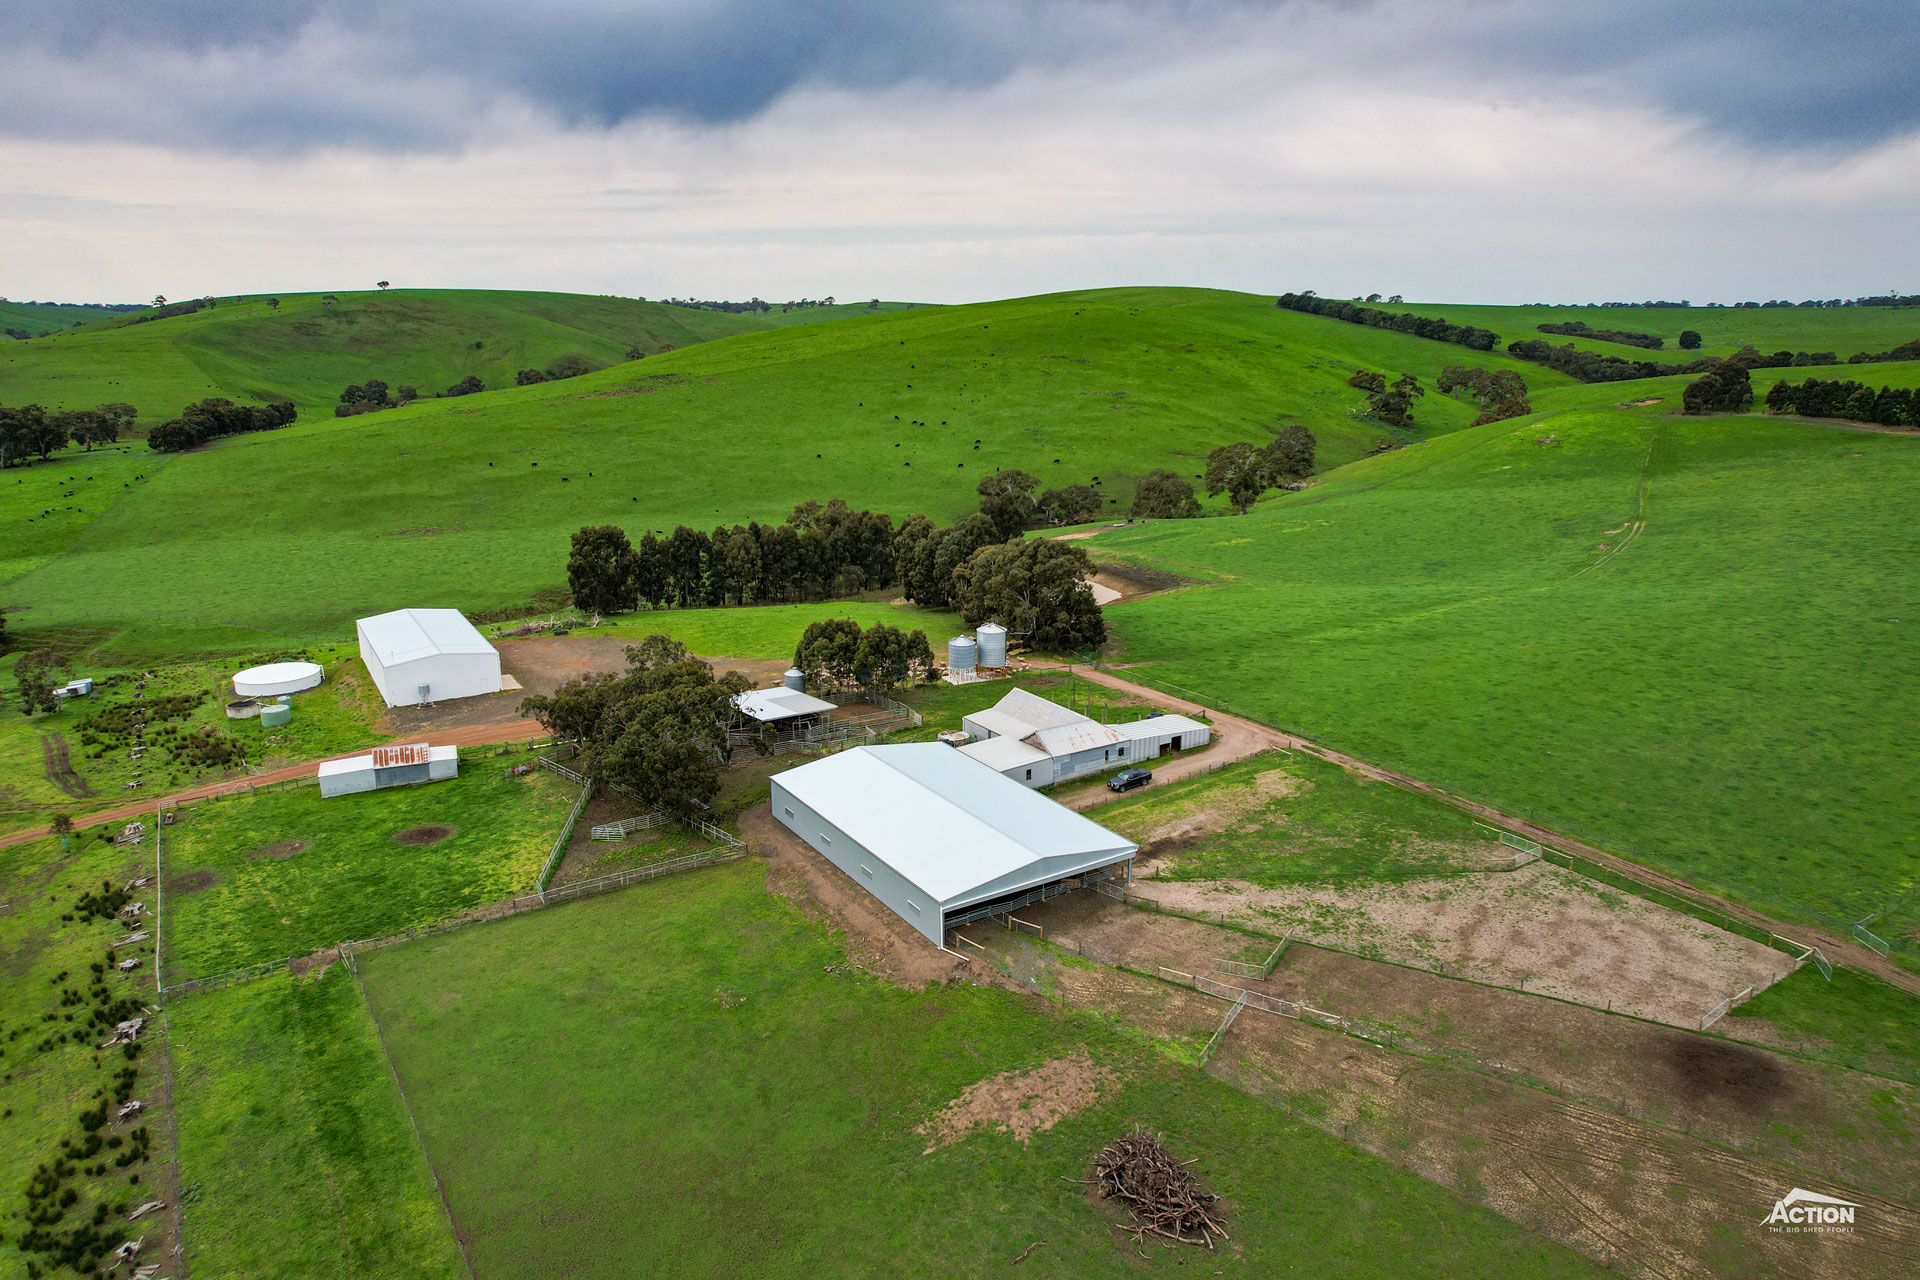 You are currently viewing 34m x 21m x 4.2m sheep yard cover